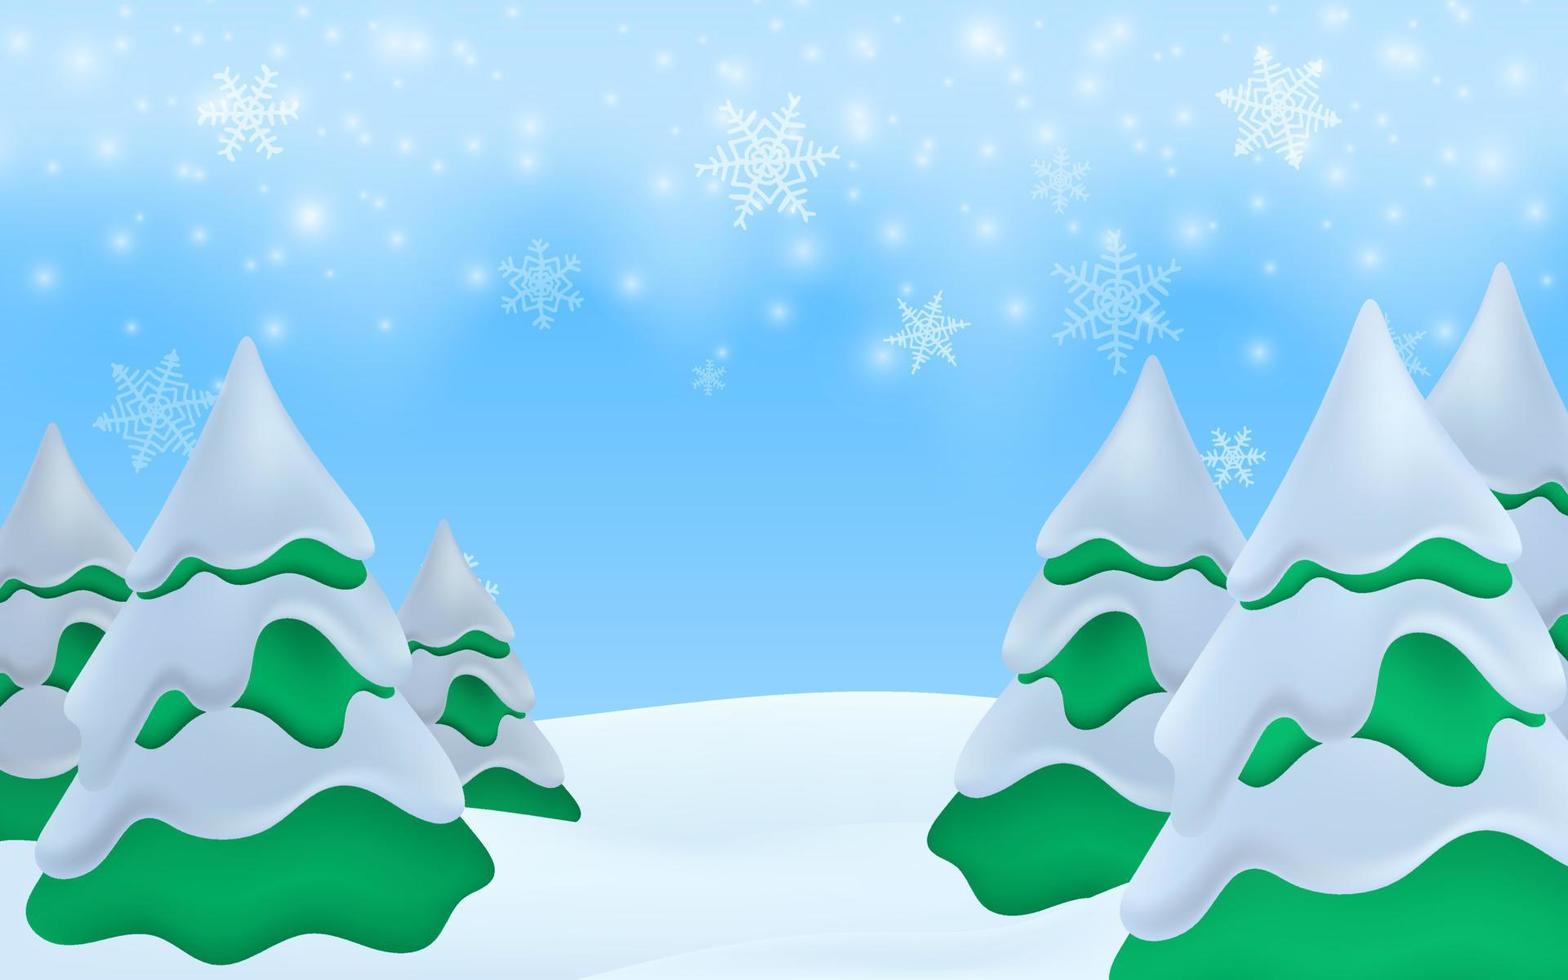 Winter season scene with snowstorm, snowflakes falling. Merry Christmas snow on meadow background. Vector 3d illustration. North pole. Winter valley landscape, blue sky. Pine Christmas tree forest.